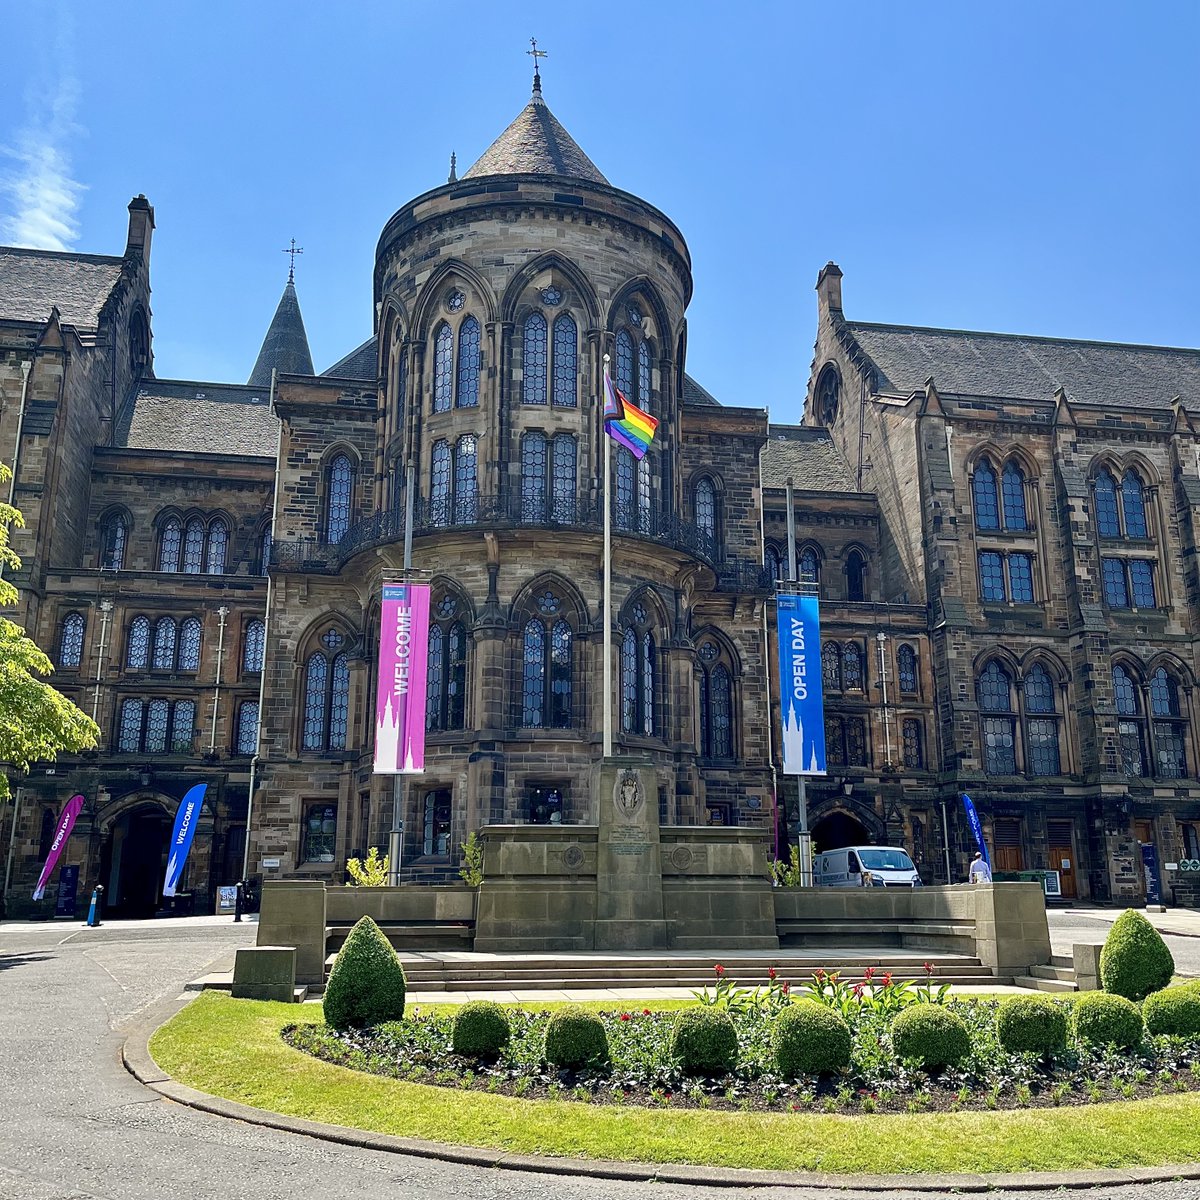 The sun is shining! What a lovely day to welcome everyone to campus for our Open Day. ☀️ 💙

Enjoy exploring our beautiful Gilmorehill campus & meeting our incredible #TeamUofG community. 👋 🏰